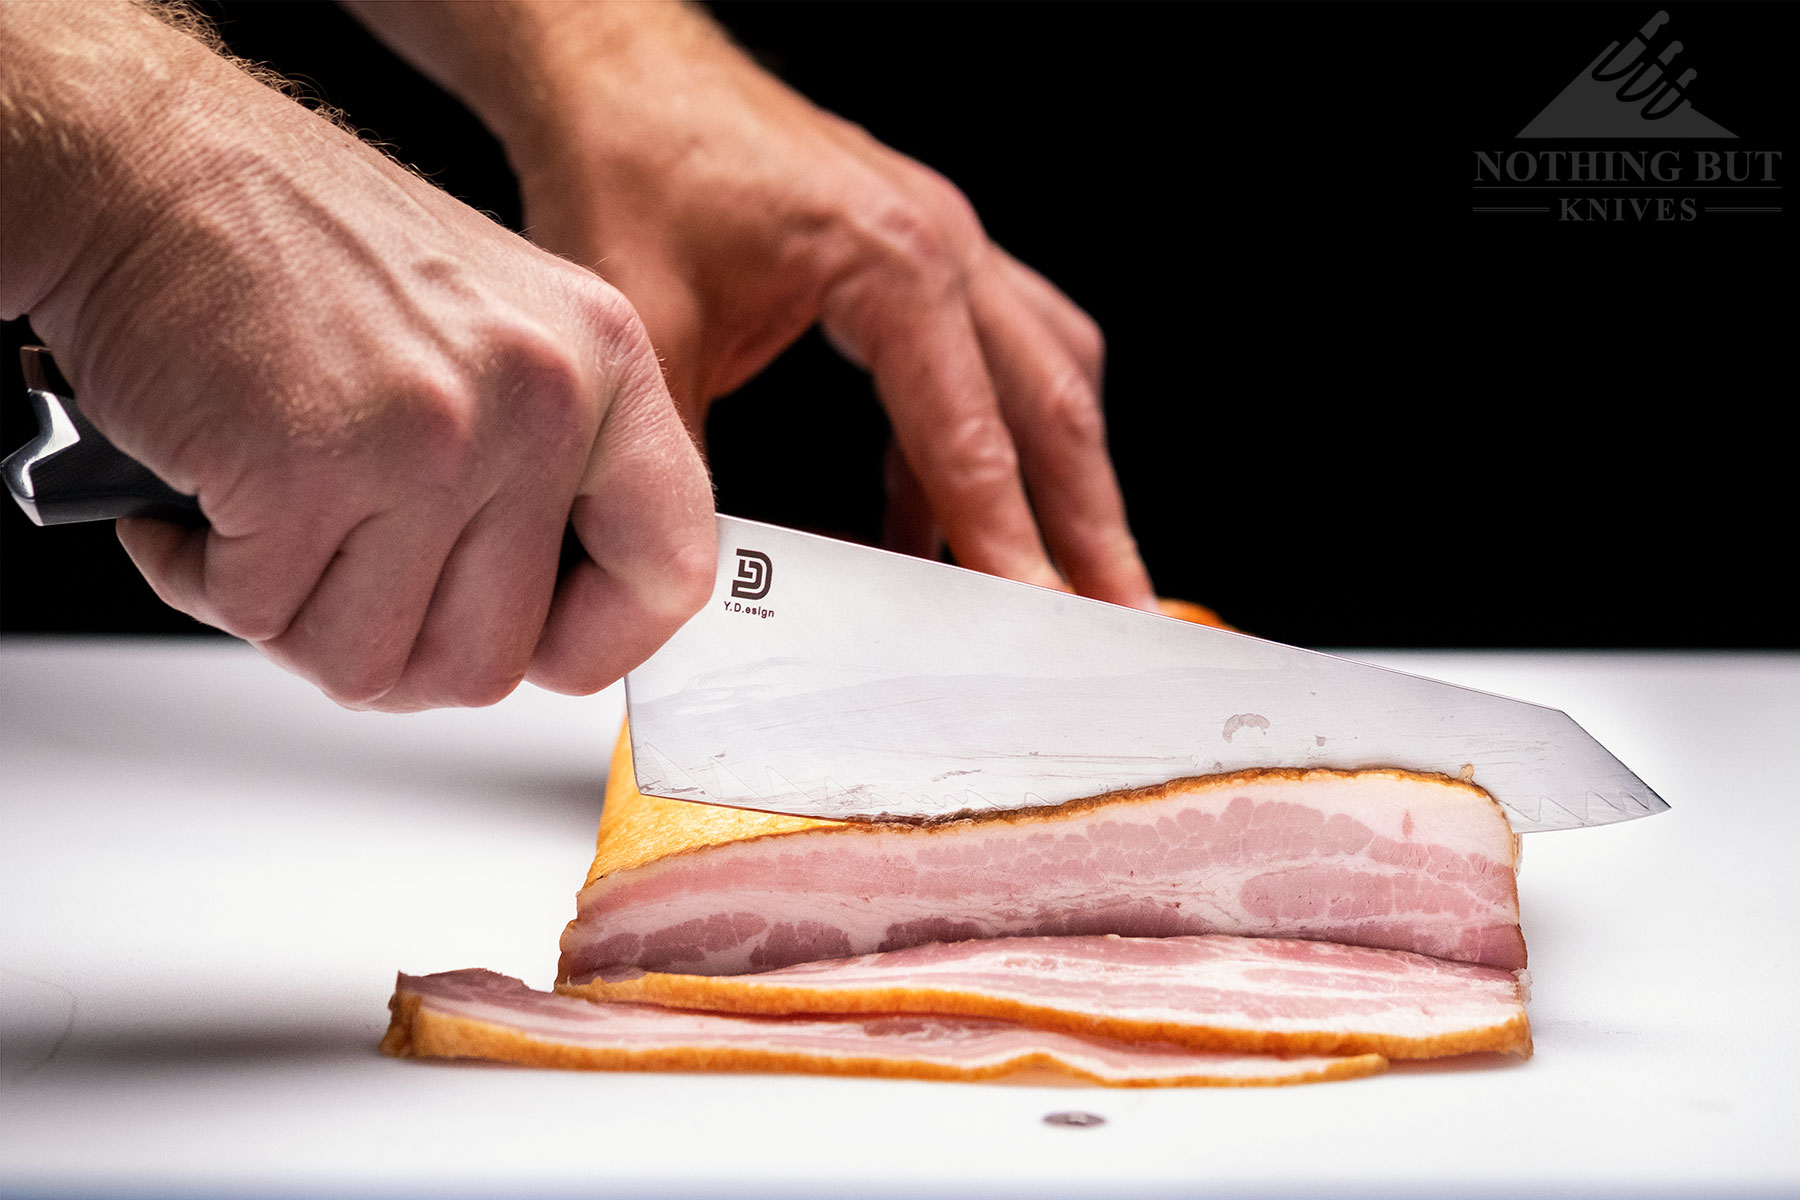 The Vosteed Morgan chef knife struggled a bit when slicing a slab of bacon, but it performed better than most other knives at its price point.